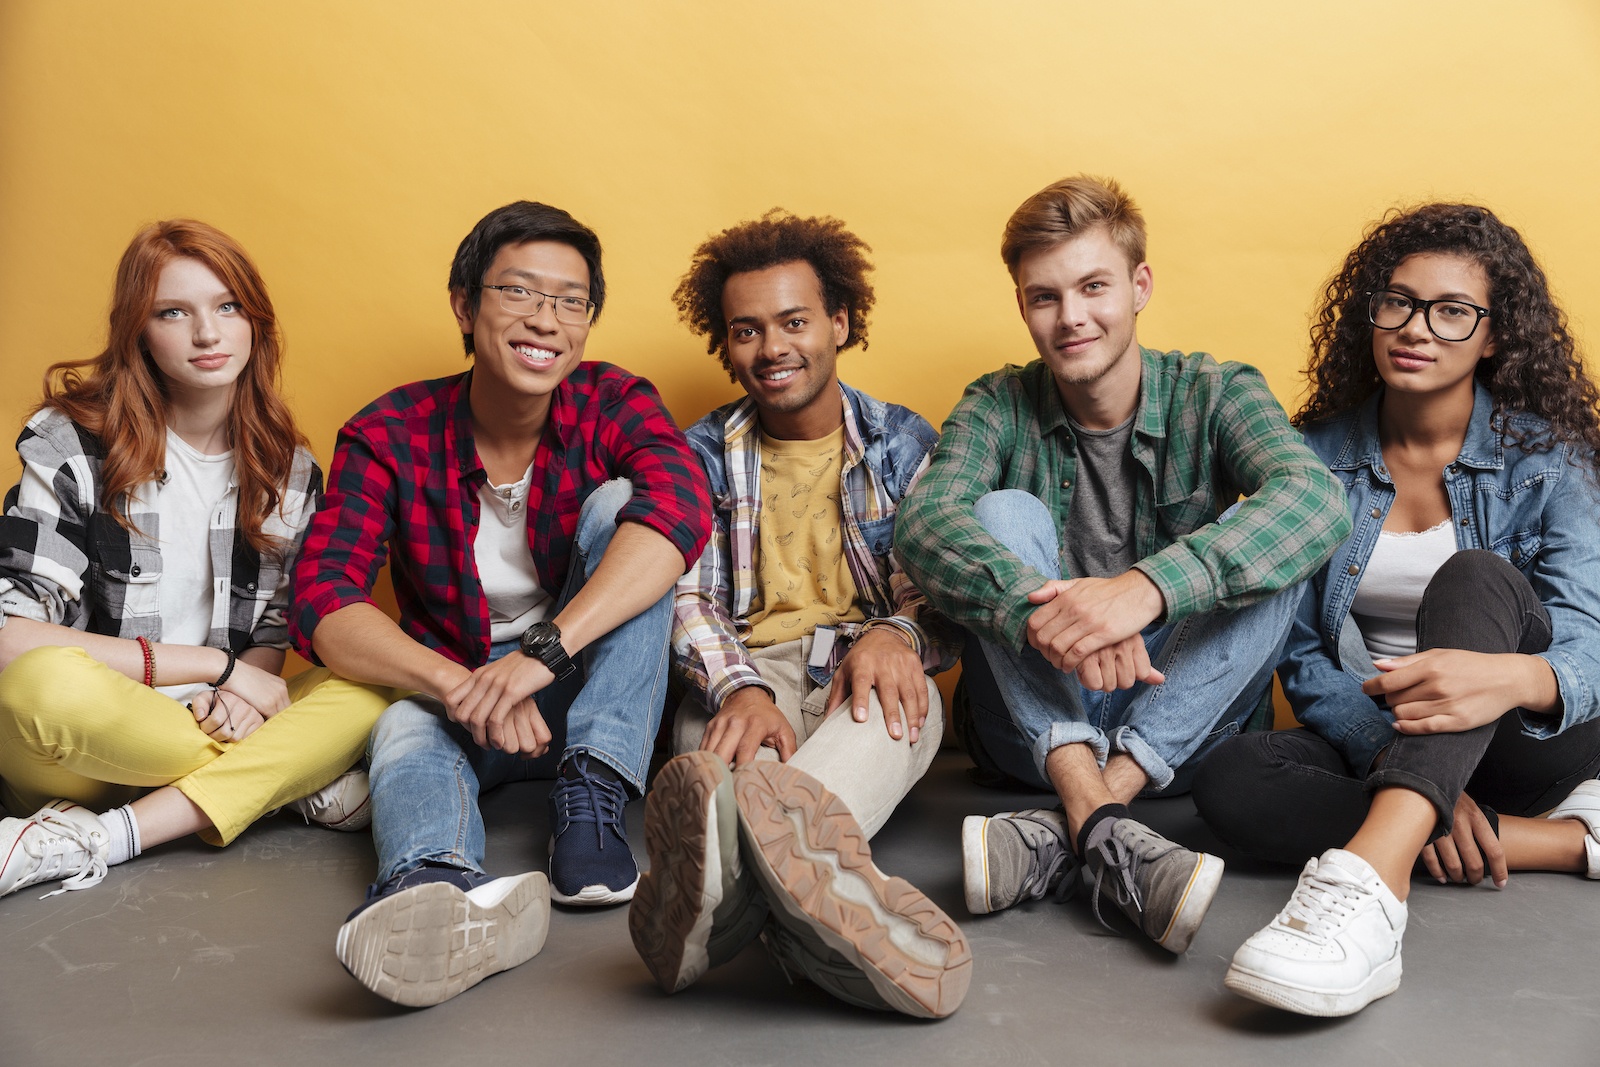 Group of people sitting together over yellow background